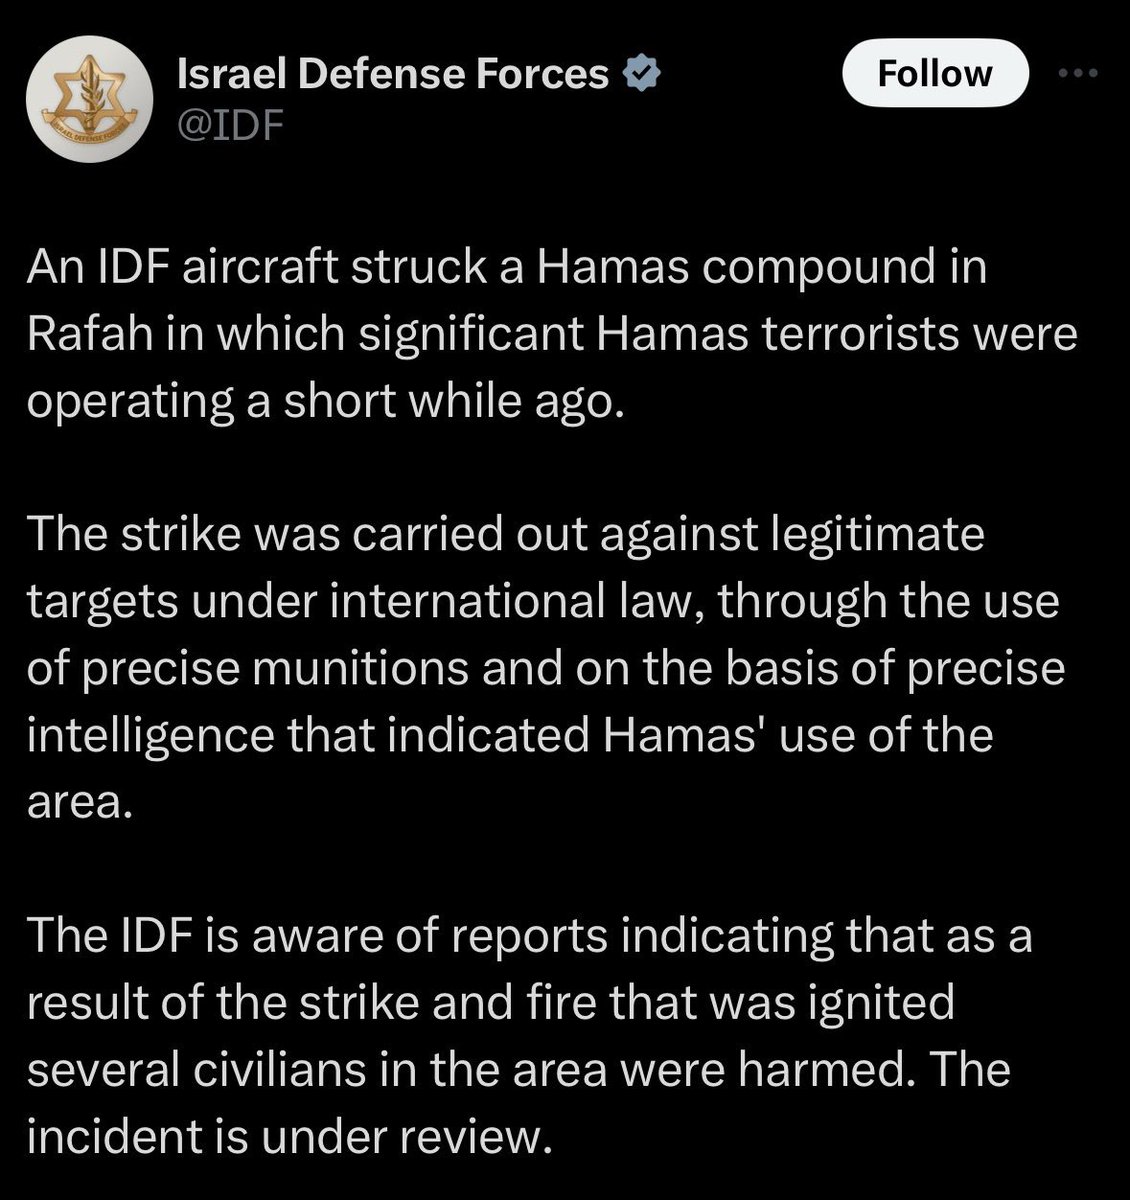 Here we go! The gang of thugs mistakenly called the IDF admitted to the massacre in Rafah and the beheading of babies. Biden is complicit Sunak is complicit Germany is complicit Arab leaders are complicit You all are war criminals. #AllEyesOnRafah #Israel #Rafahmassacre